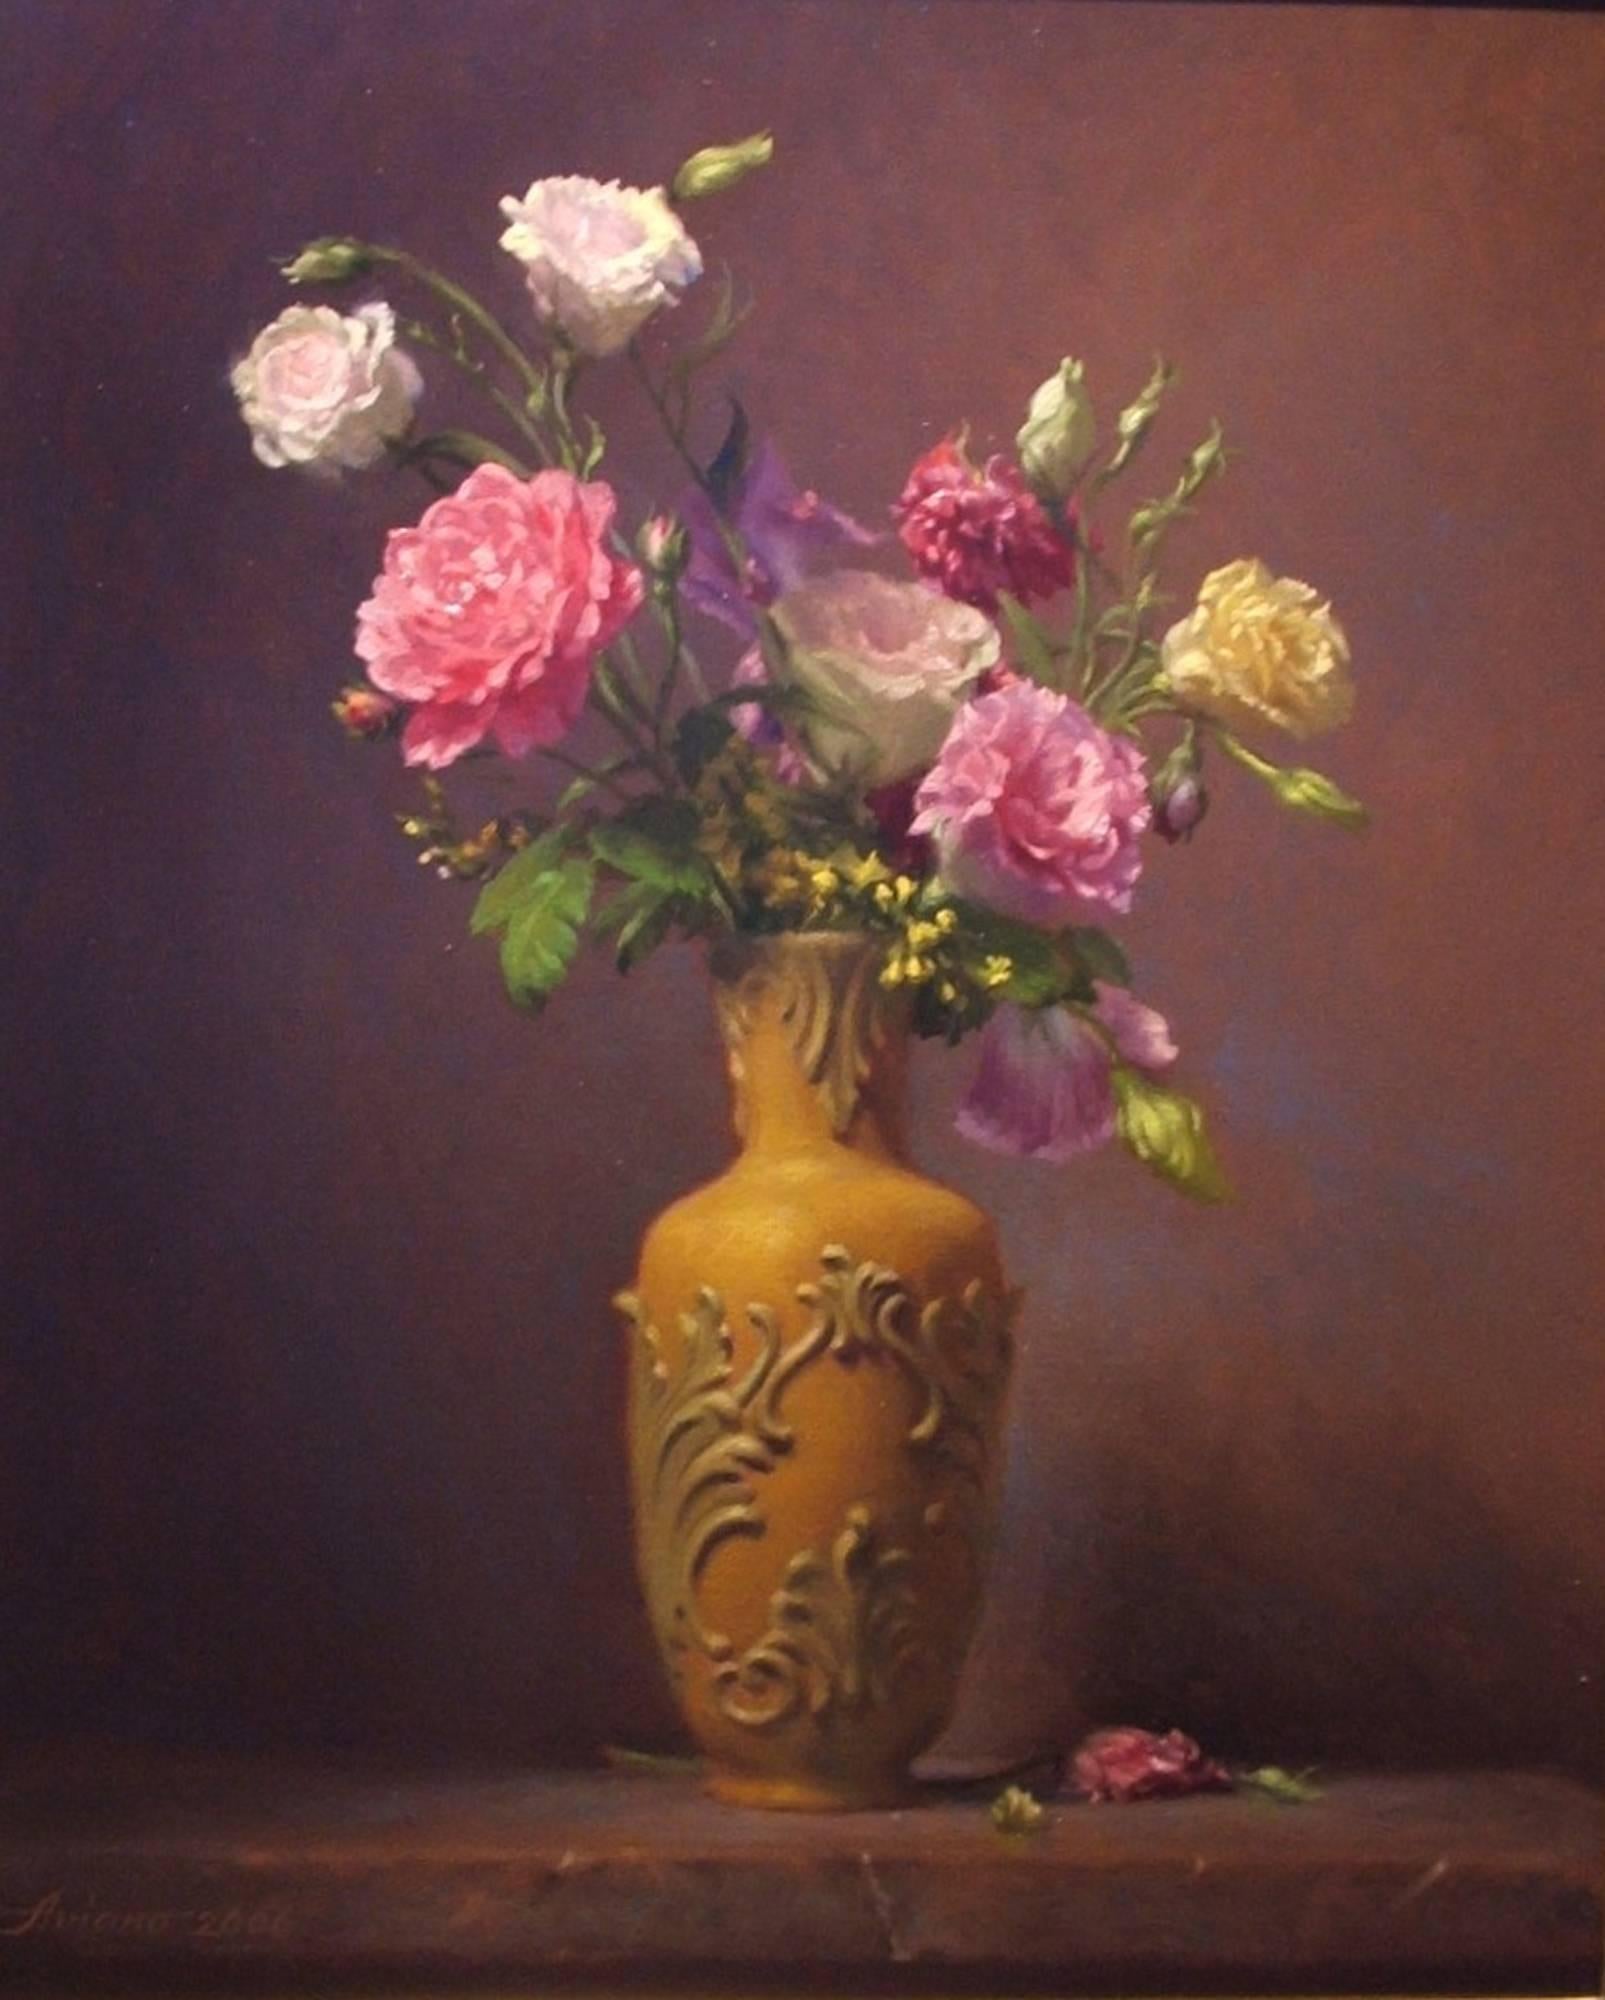 Roses & Lilien – Painting von Michael Aviano